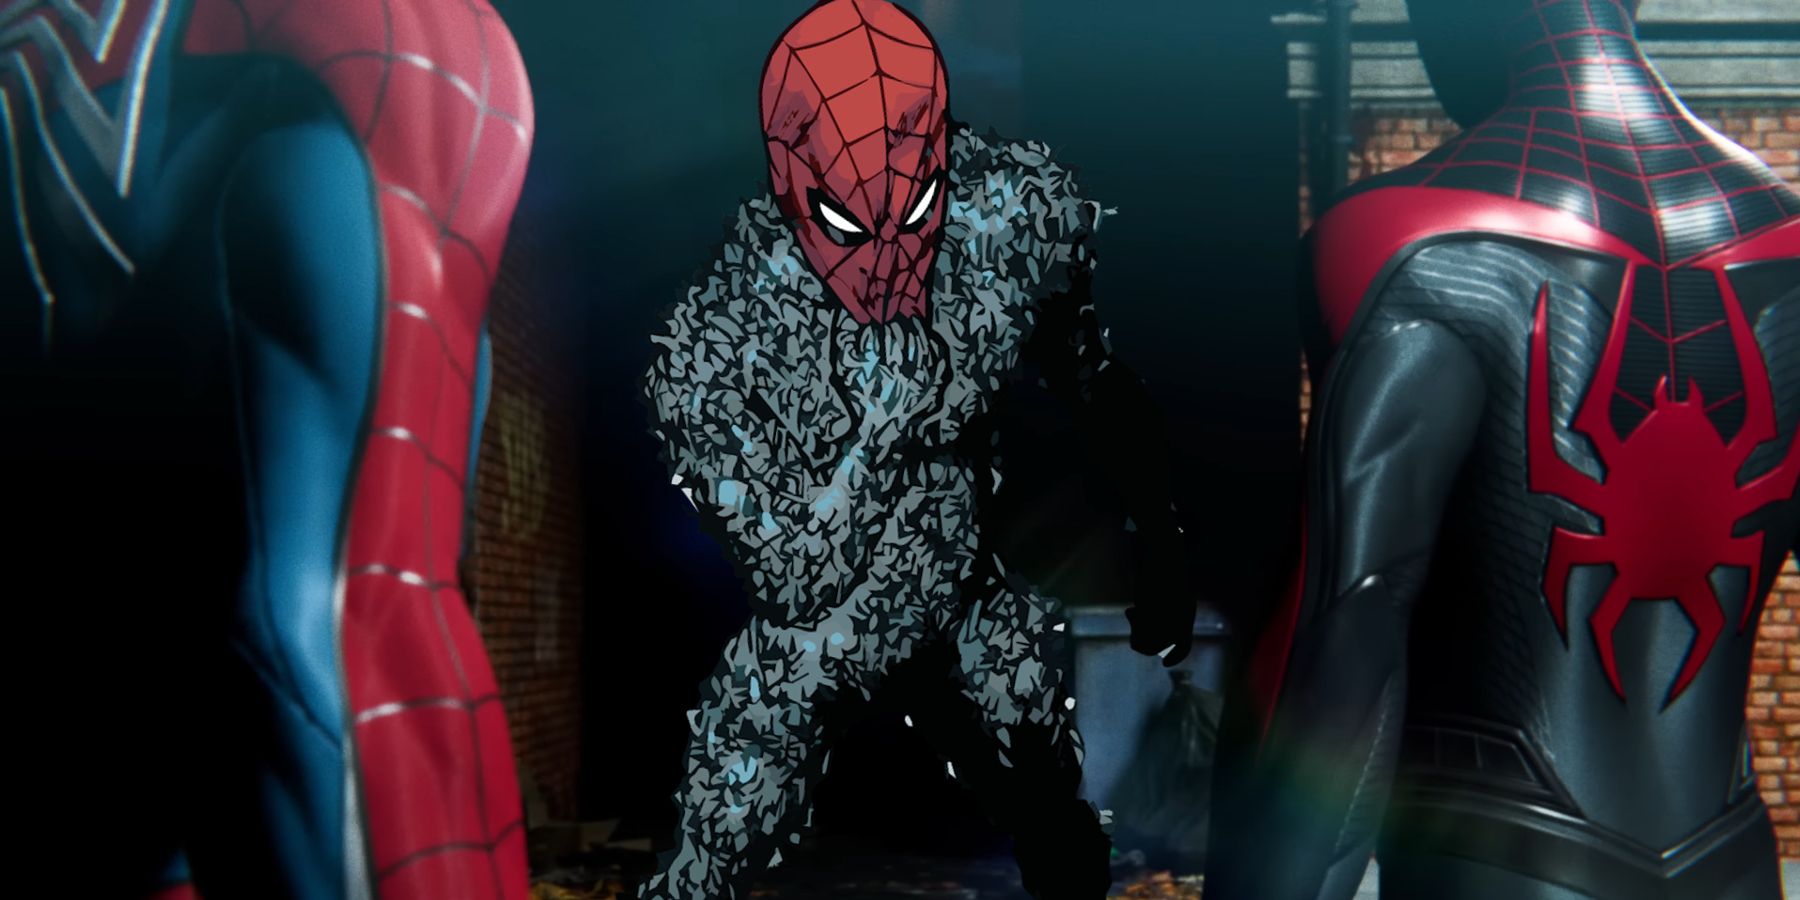 spider-man by marvel 2 spider-man skin cosmetic outfit suit horror arachnophobia